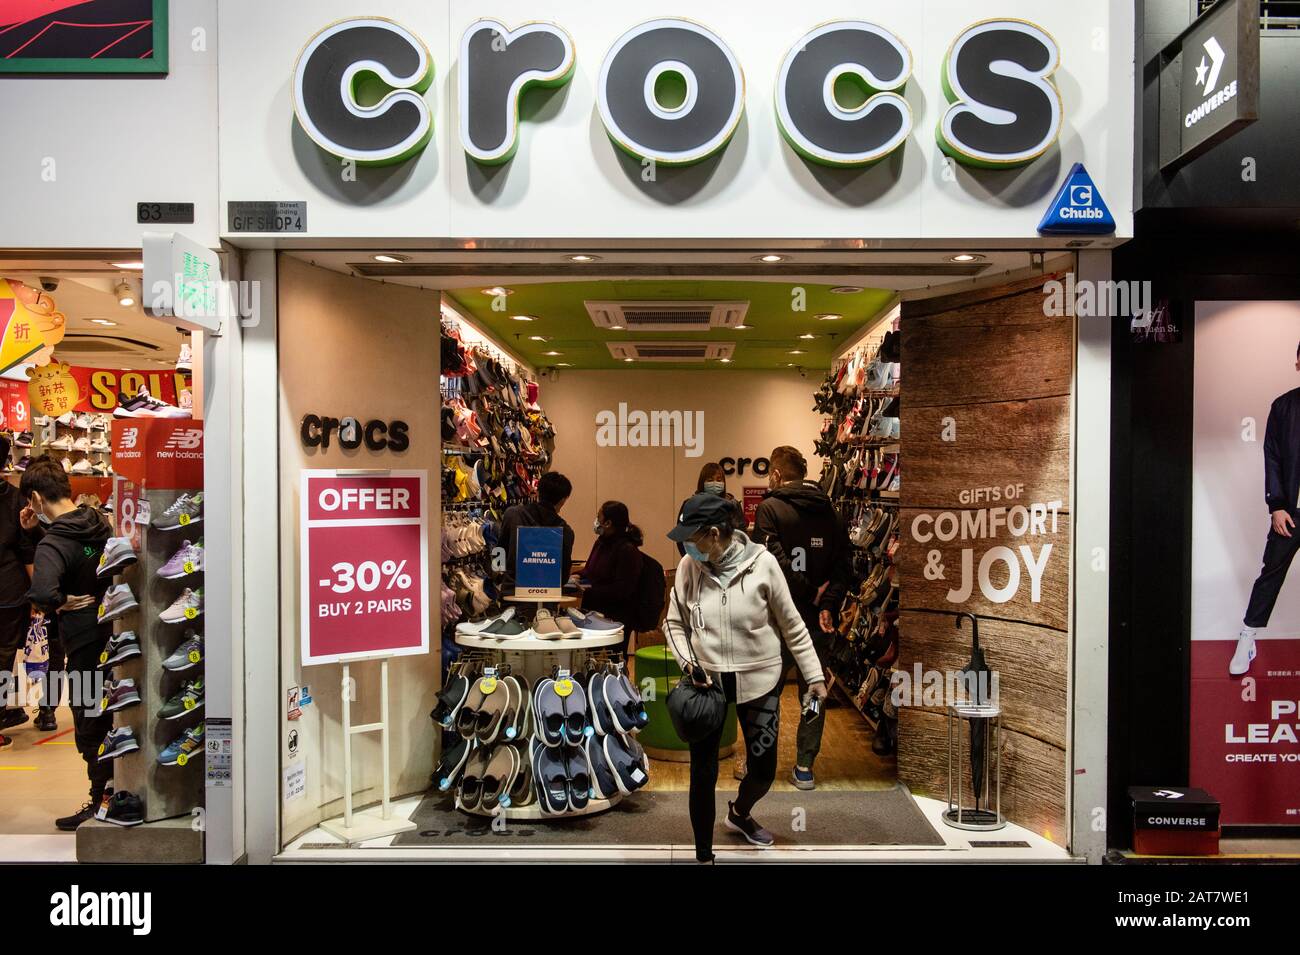 Crocs Sign High Resolution Stock Photography and Images - Alamy